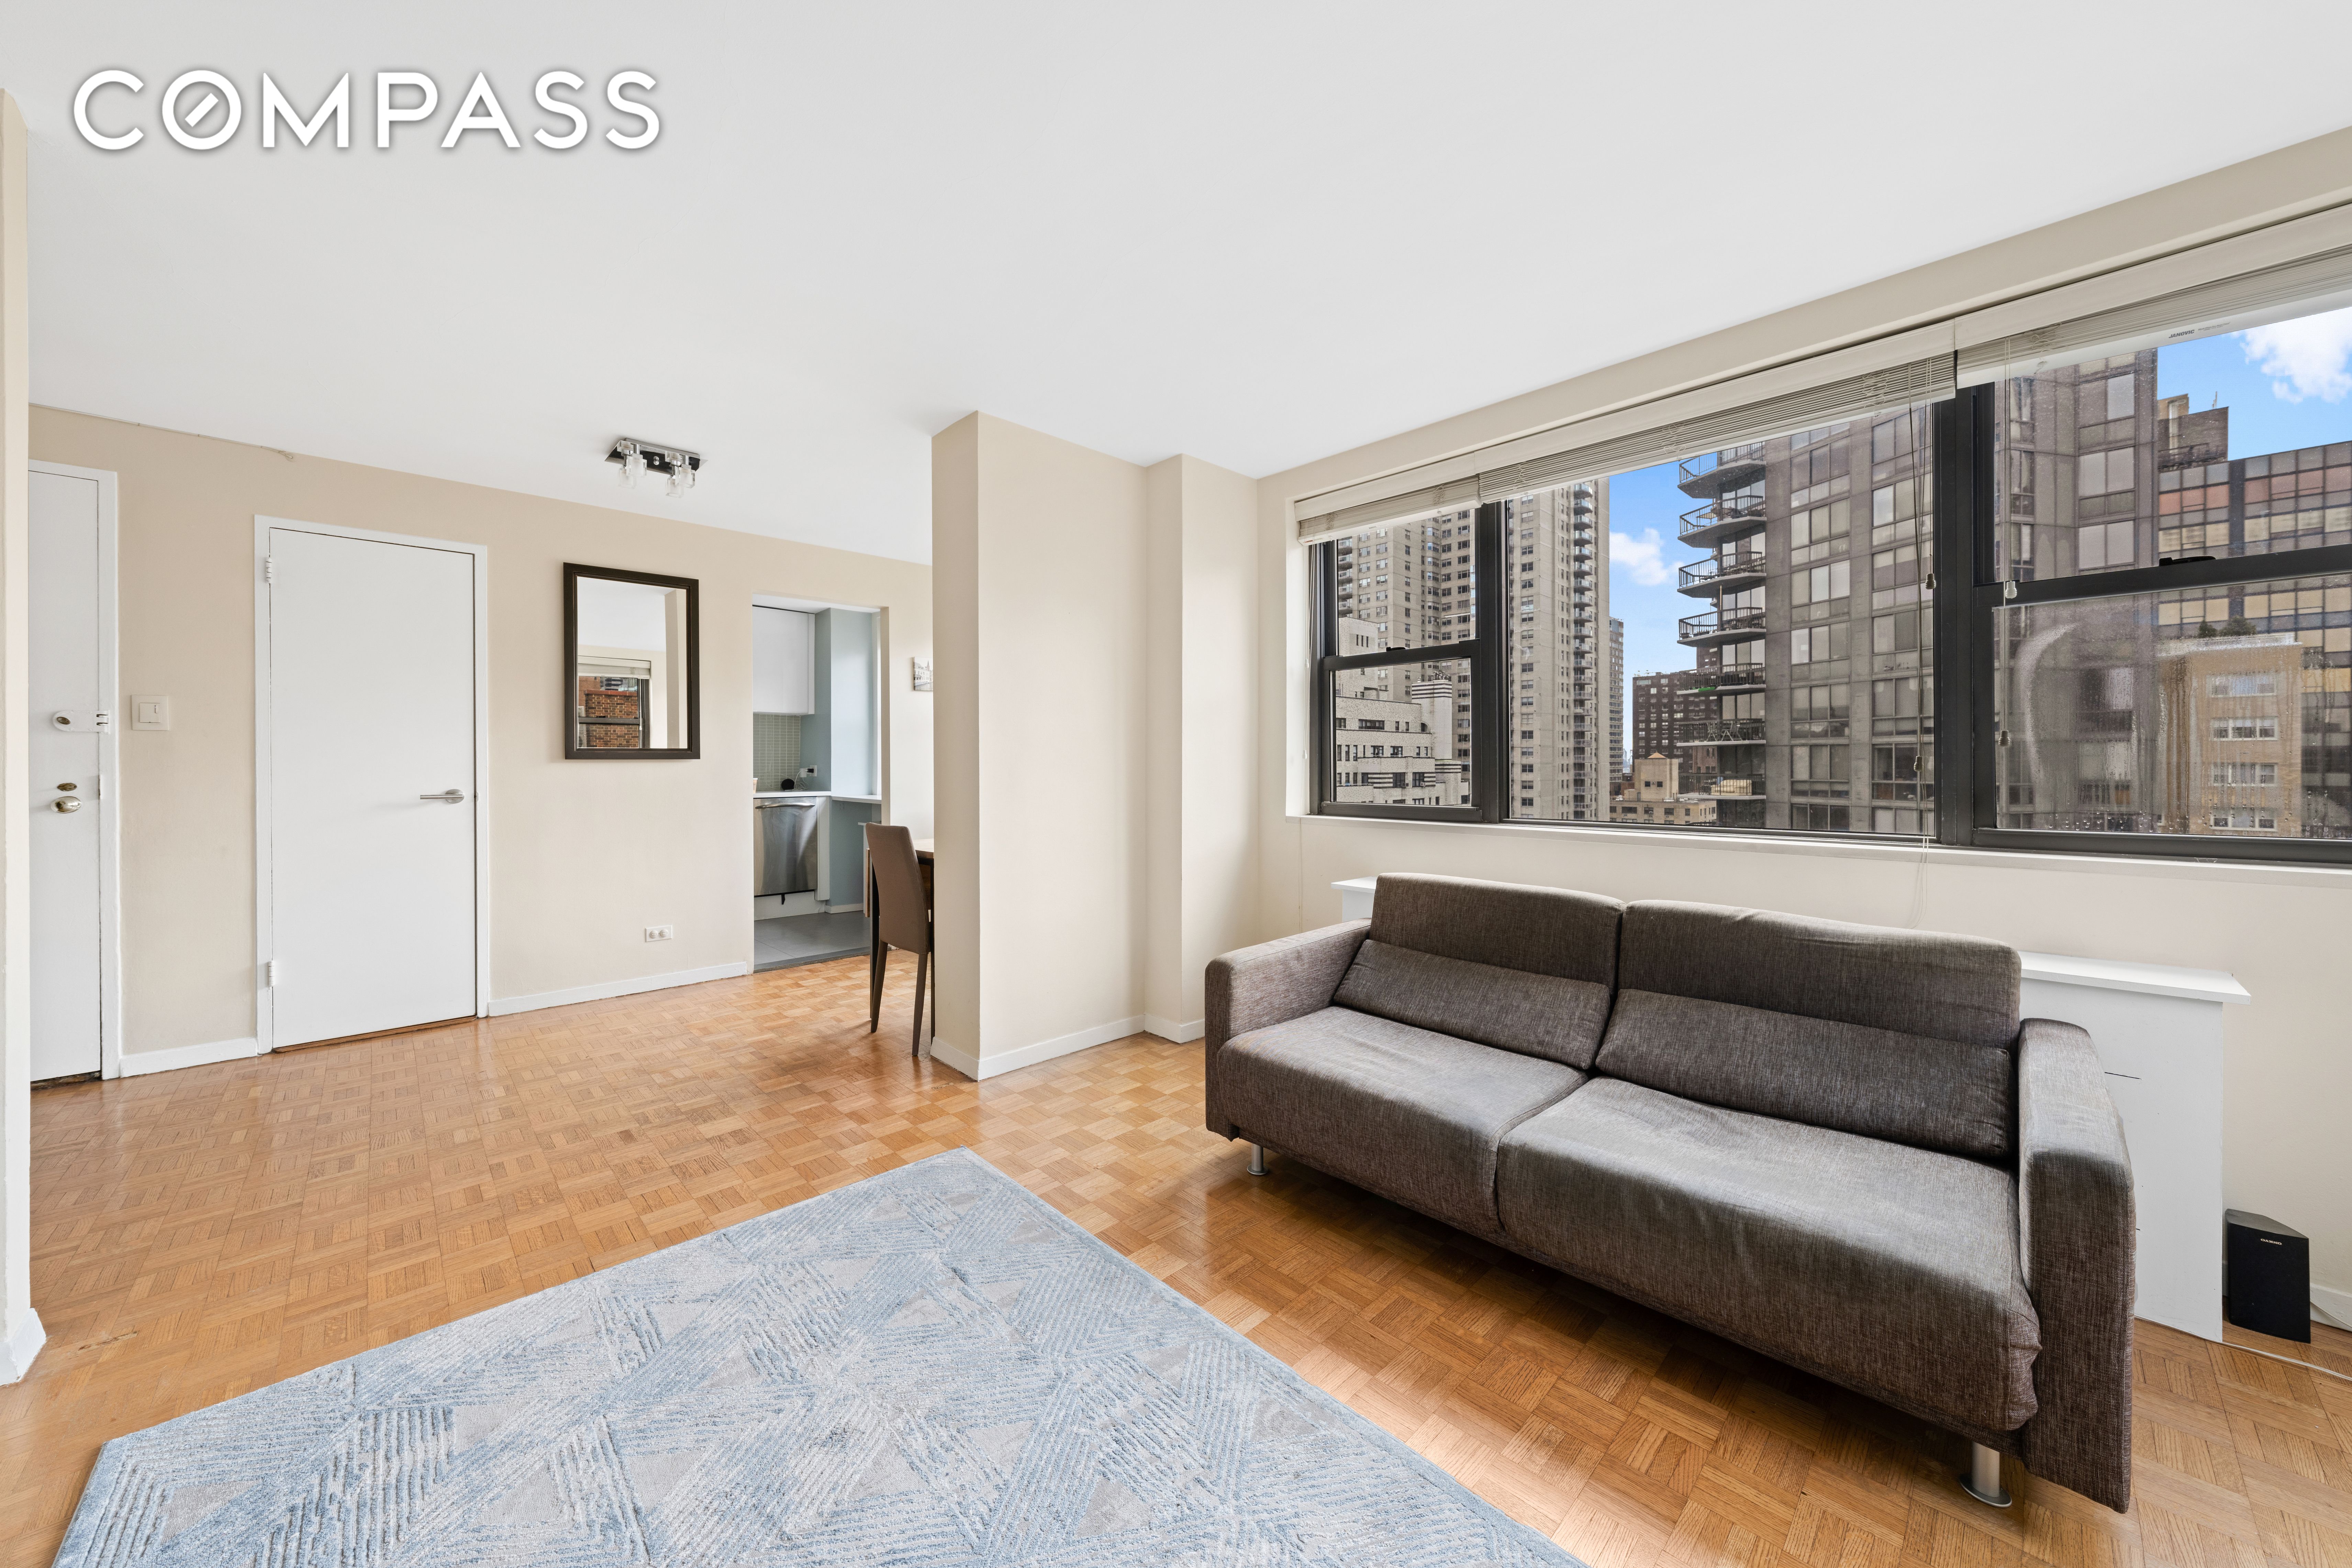 357 East 57th Street Sutton Place New York NY 10022